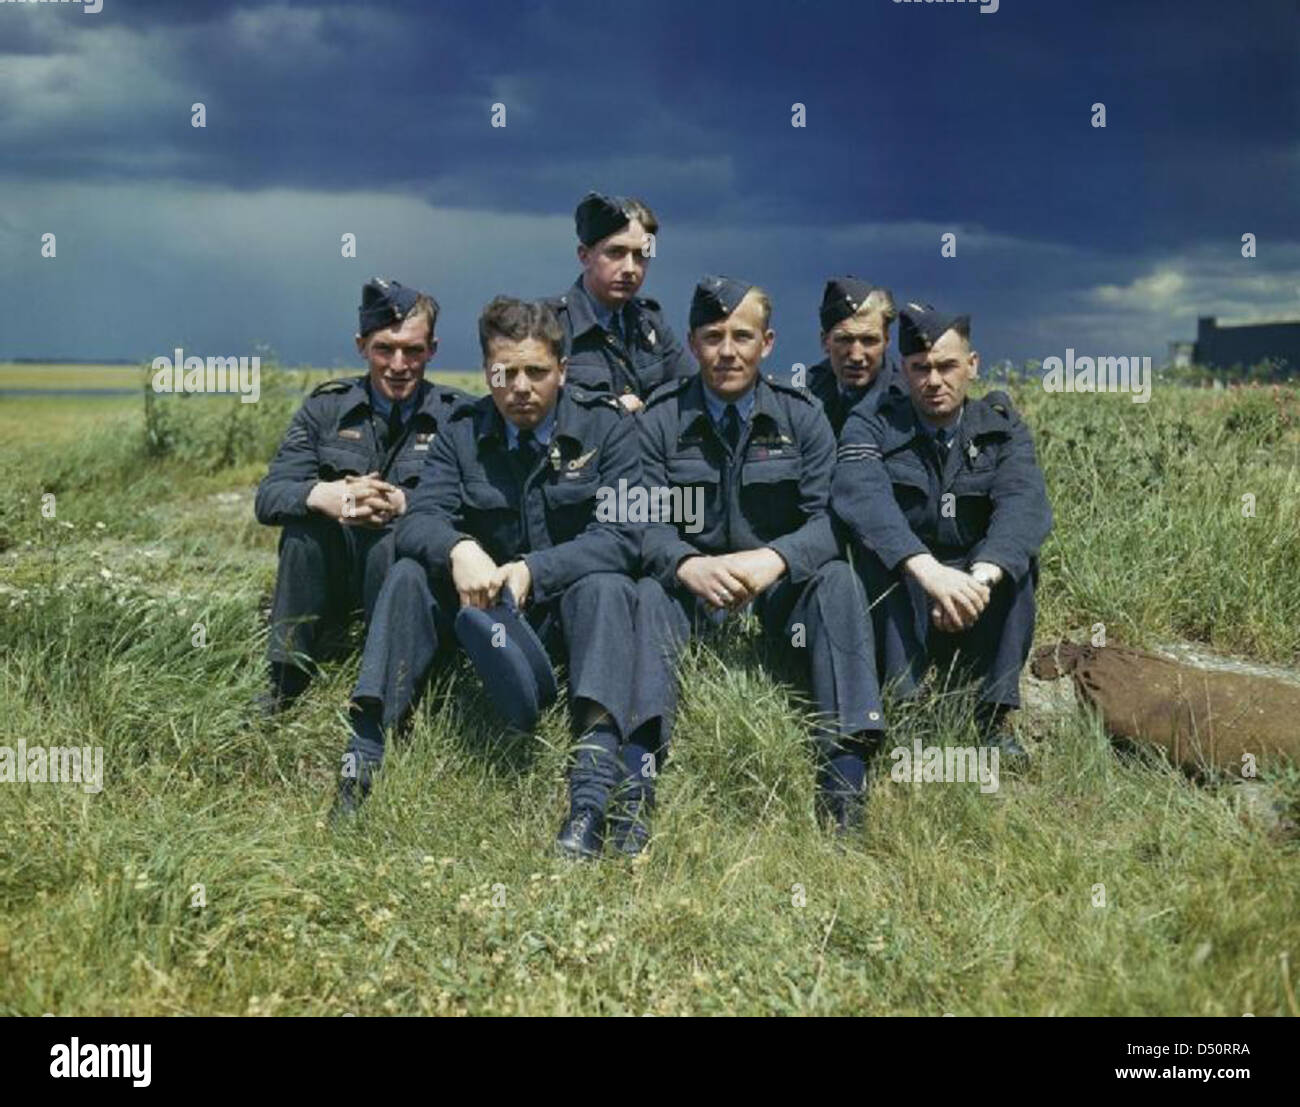 Flight Lieutenant Joe McCarthy (fourth from left) and his crew of No. 617 Squadron (The Dambusters) at RAF Scampton, 22 July 194 Stock Photo